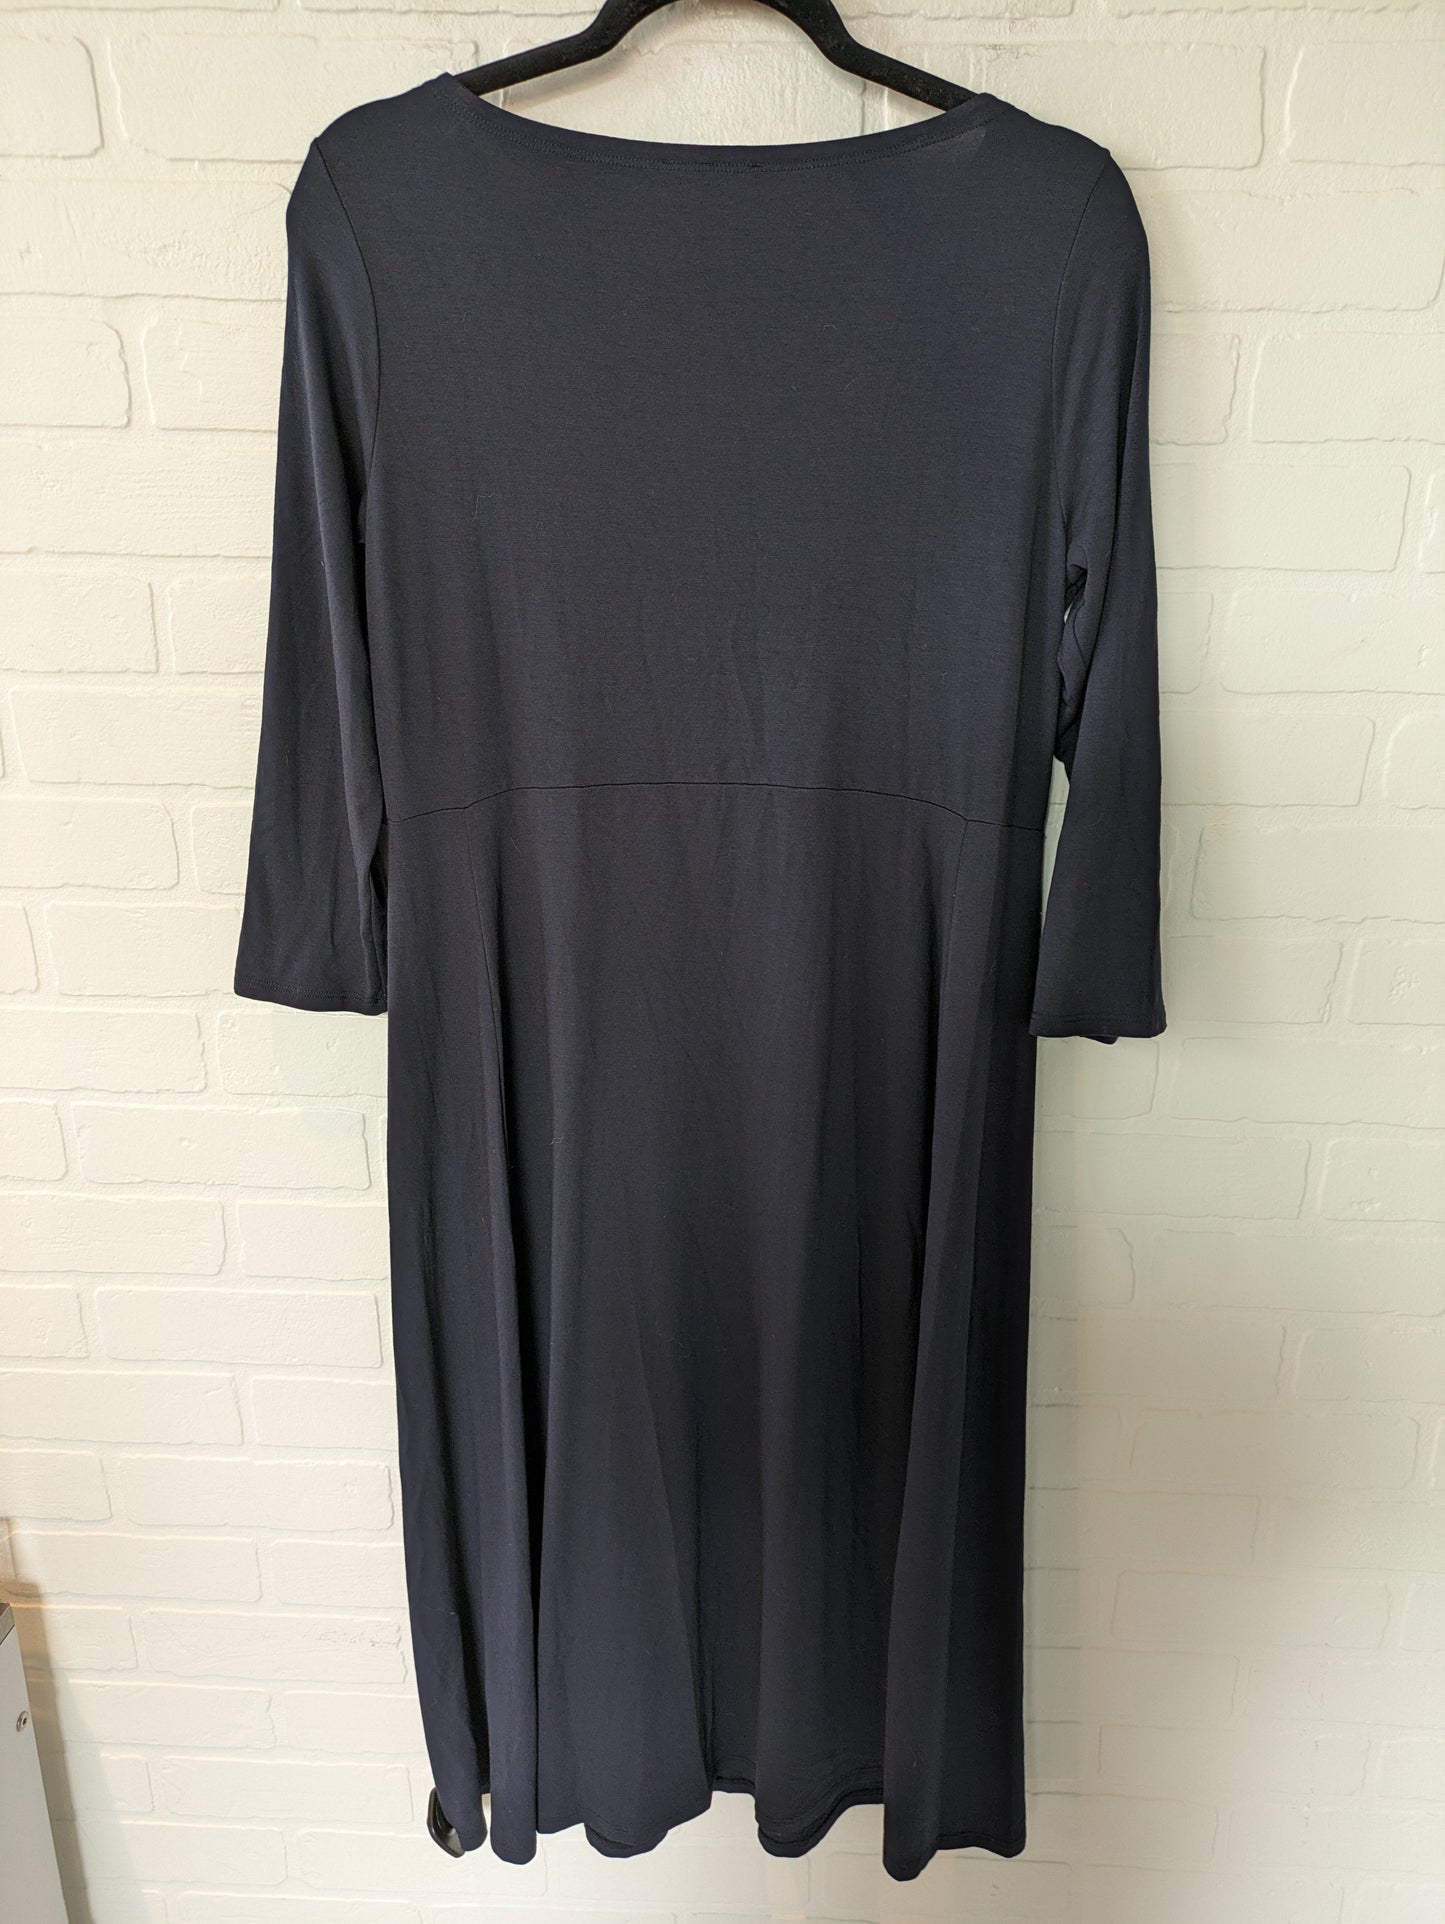 Blue Dress Casual Midi Eileen Fisher, Size S